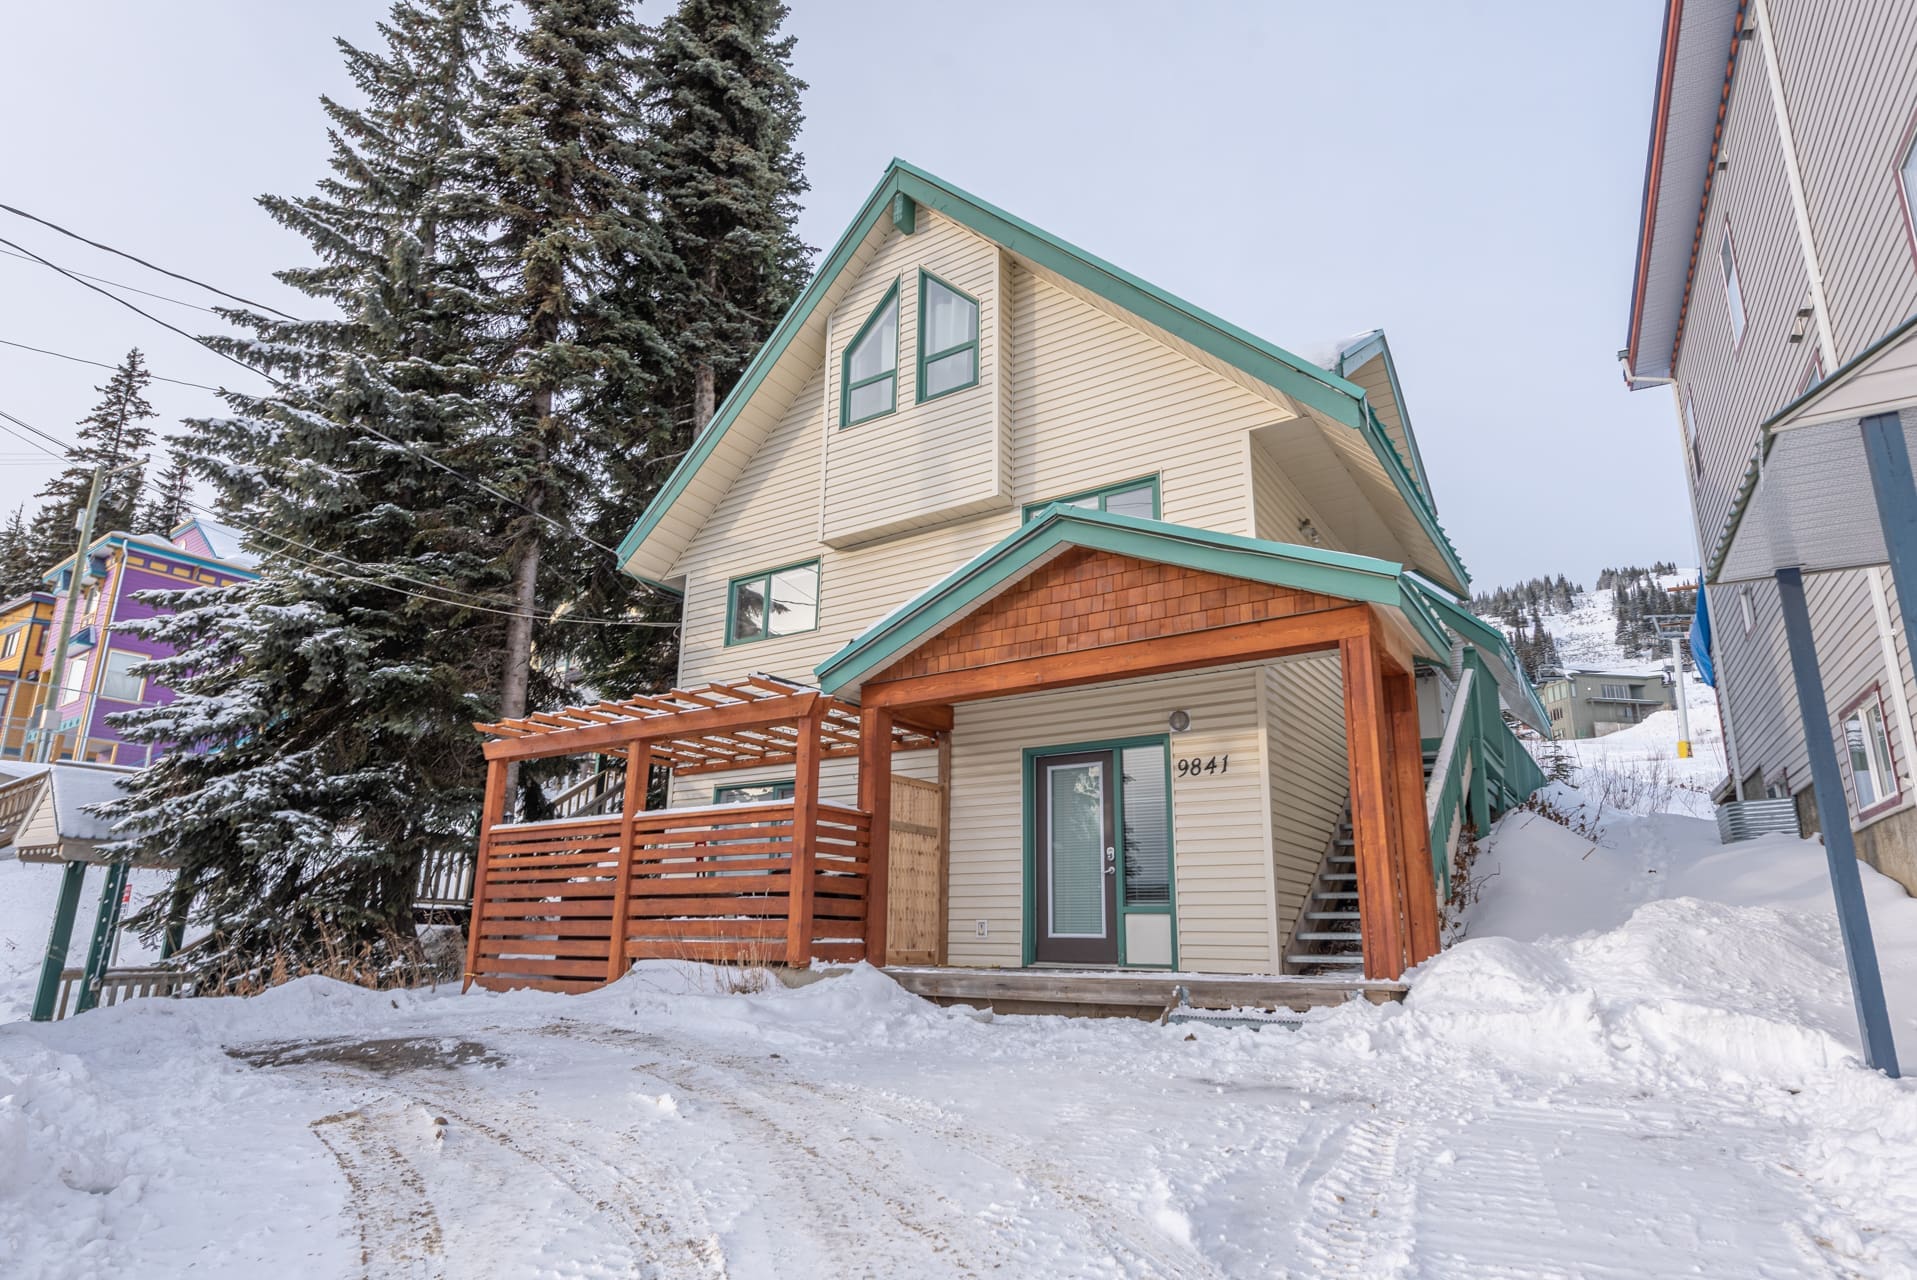 Exterior of Skimore Chalet. Backs onto the Alpine meadows chairlift, ski right from your yard onto the lift. Quick walk to the village. Private hot tub, laundry, BBQ on large deck with beautiful views of mountain and private suite on ground level with hot tub and laundry.